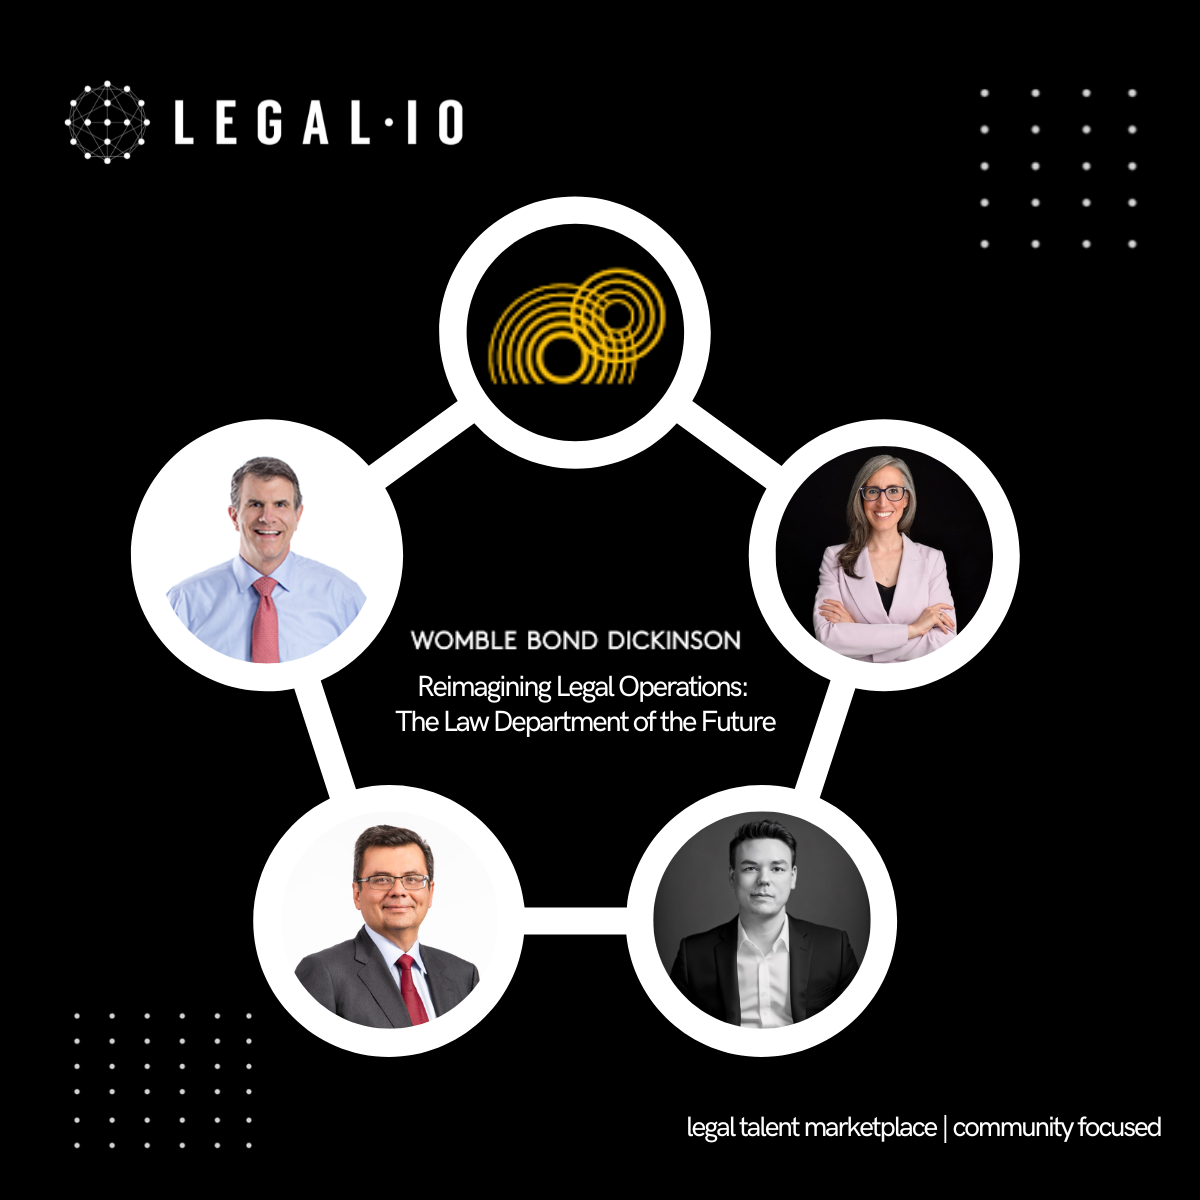 Revolutionizing Legal Operations: A Vision for the Future